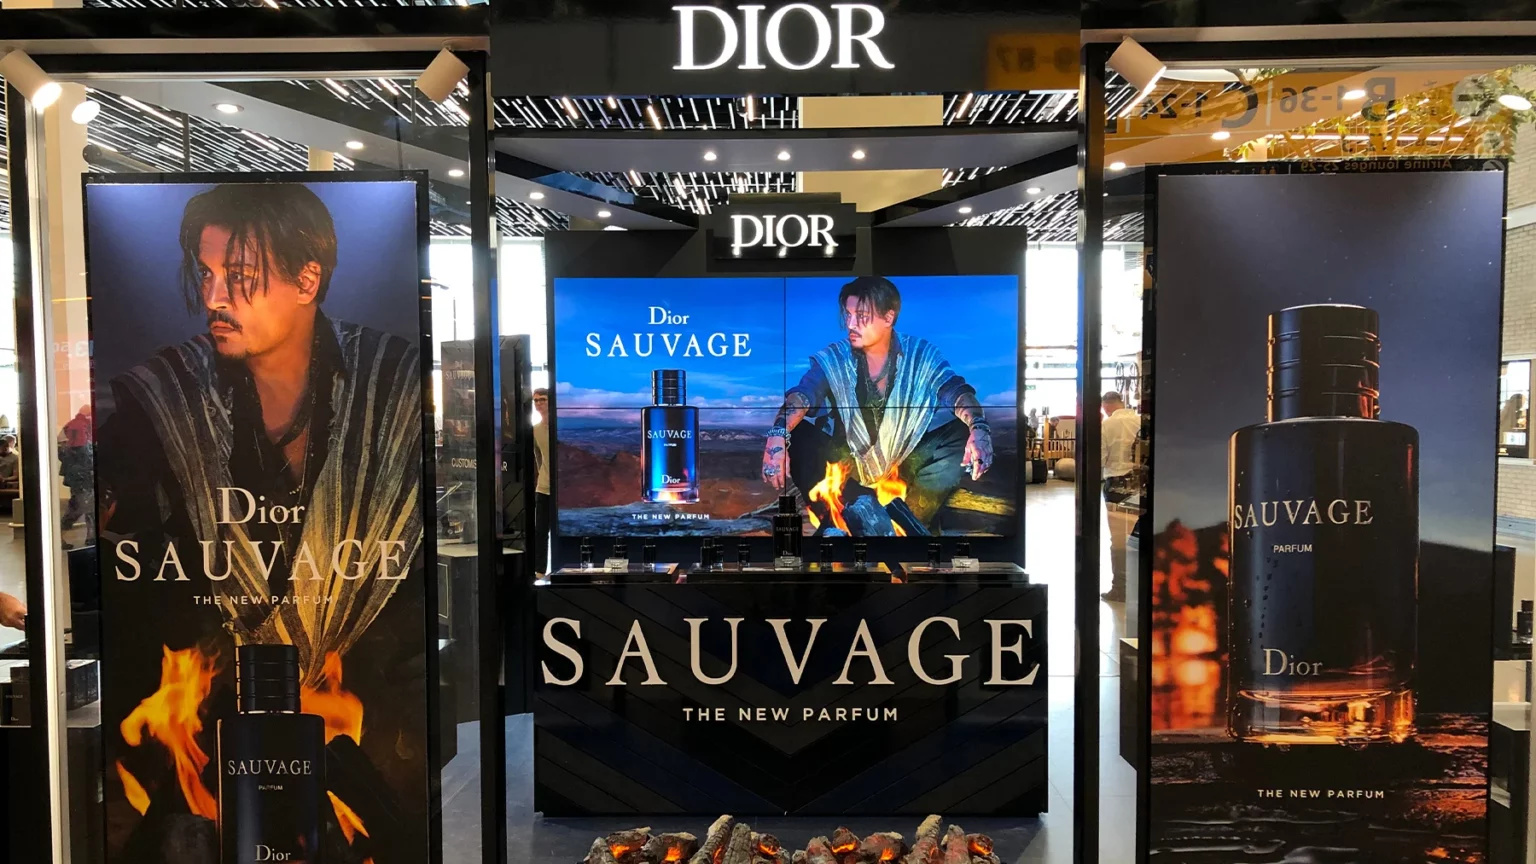 johnny-depp-extends-partnership-with-dior-sauvage-for-20-million